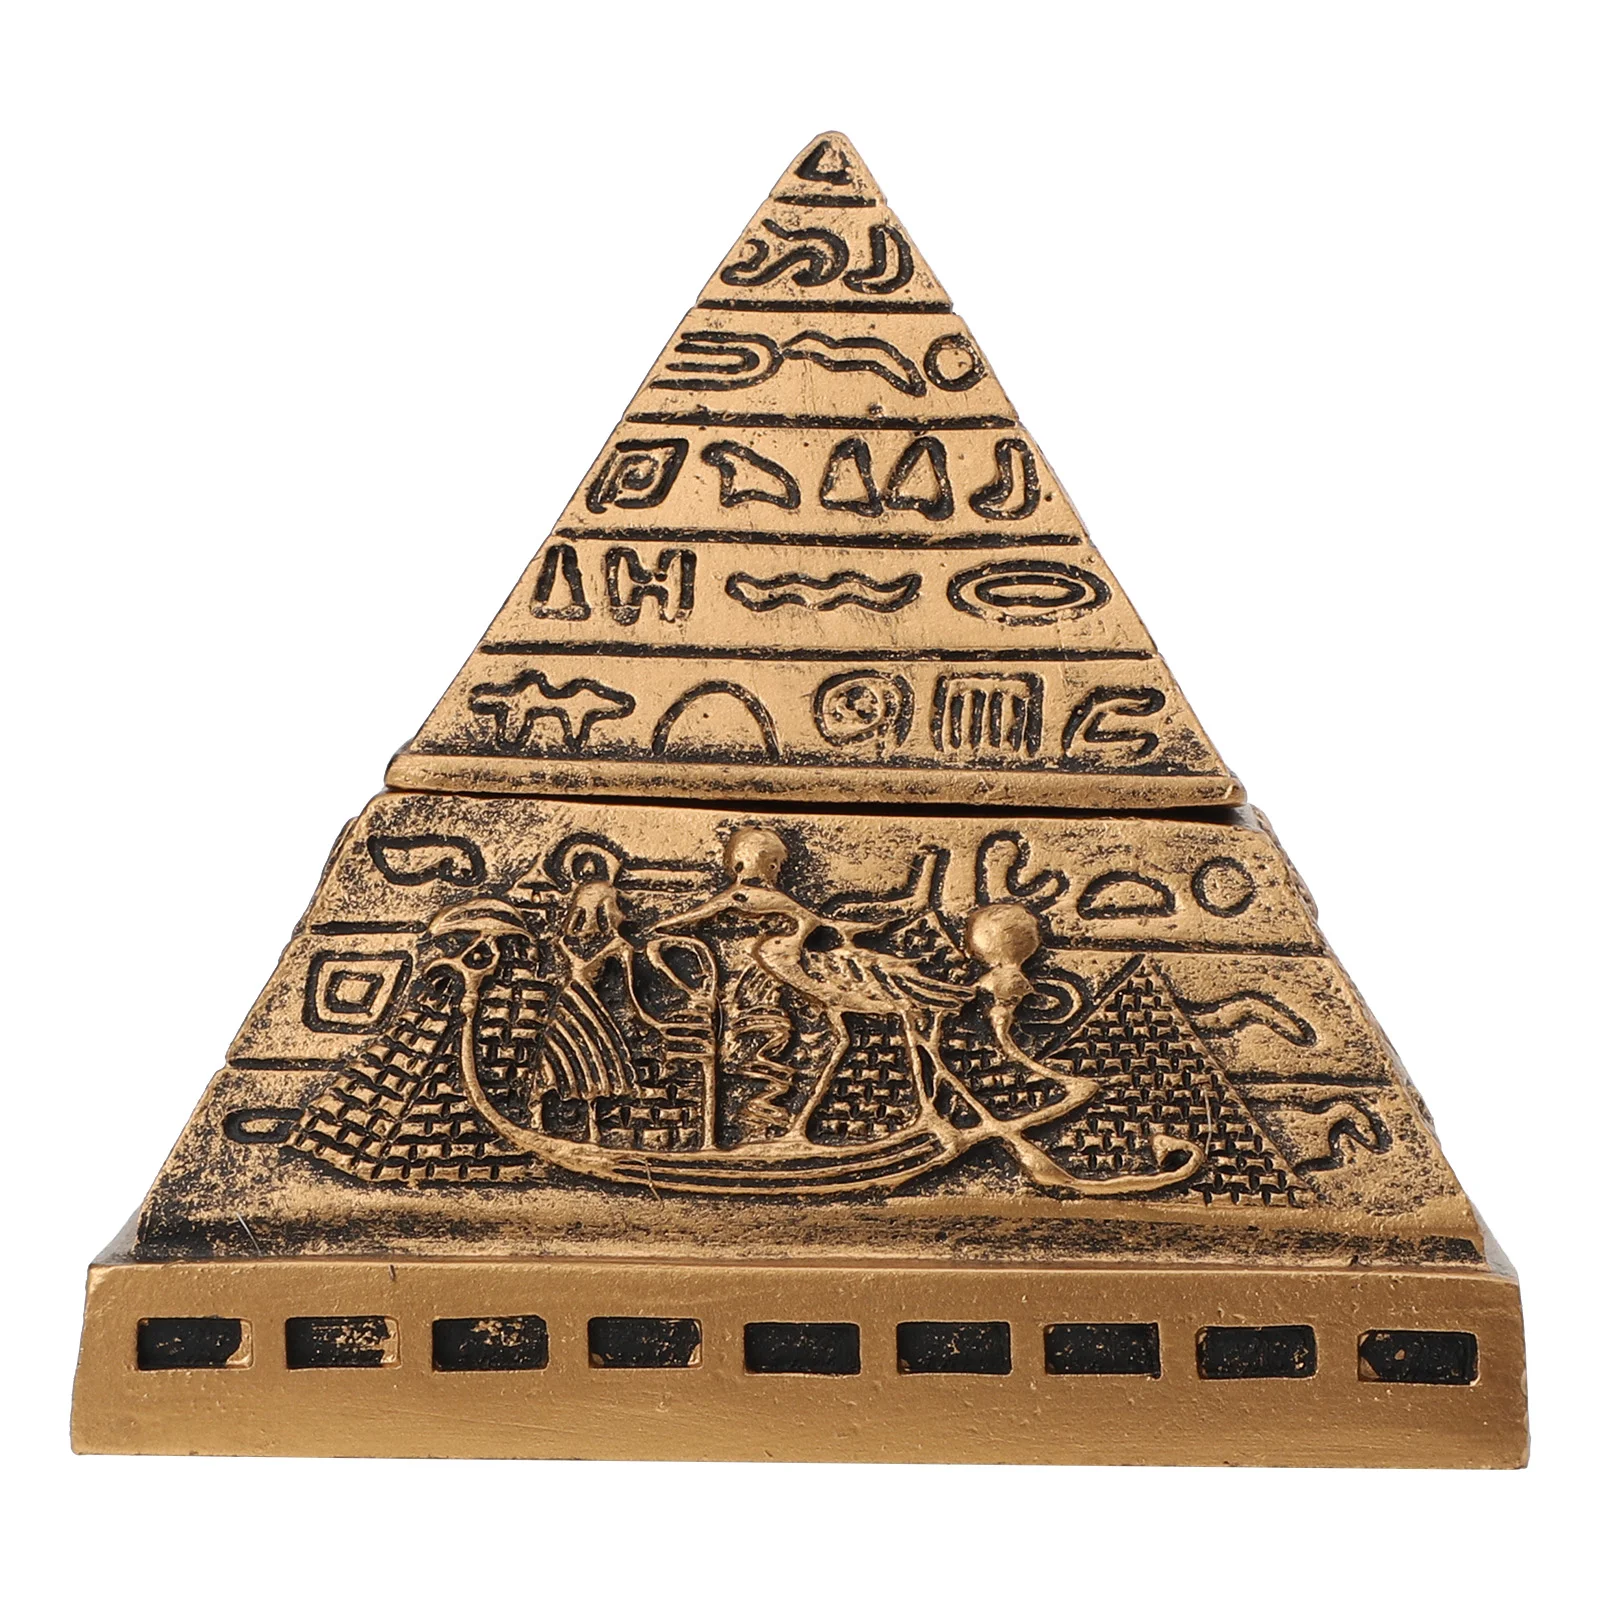 First Aid Case Vintage Home Decor Table Decor Pyramid Learning Model Organizer Egyptian Statue